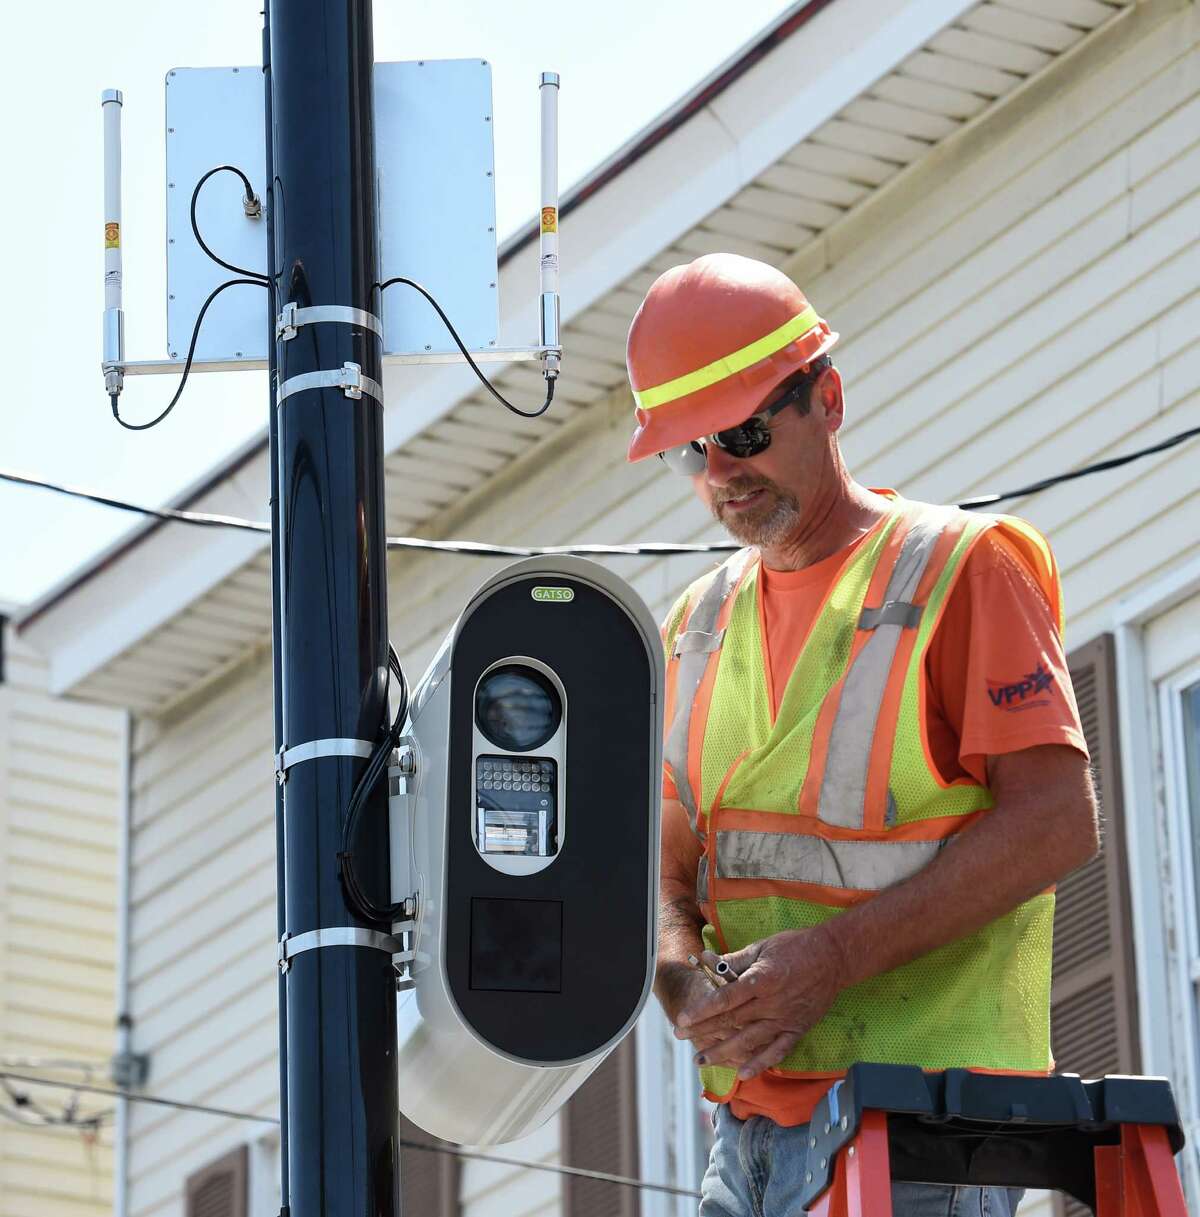 Jeff Smith of the Stilsing Company puts the finishing touches on a red-light camera that looks in to the intersection of Quail Street and Washington Avenue Thursday afternoon, July 16, 2015, in Albany, N.Y. Two intersections selected to receive red light cameras in the city of Albany will be going live on Monday morning after midnight. (Skip Dickstein/Times Union)